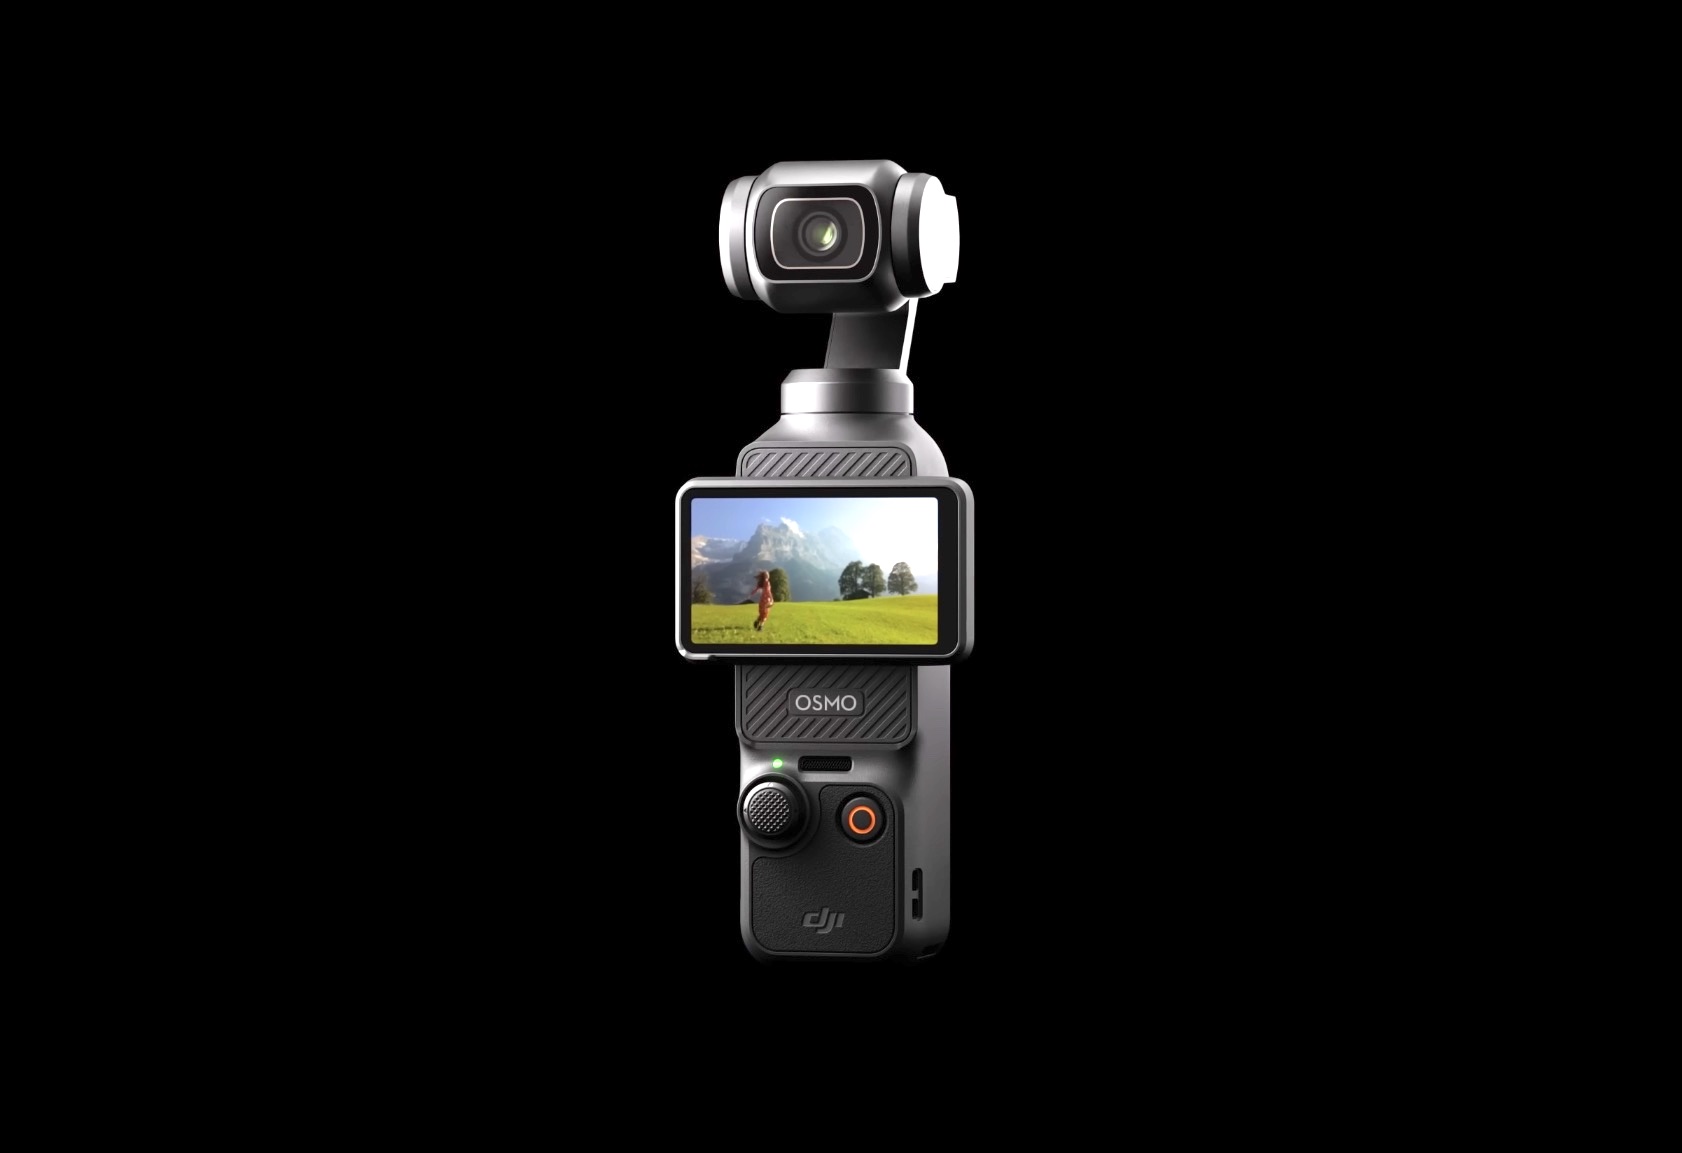 Hands-on with the DJI Osmo Pocket 3: DJI's creator camera gets a